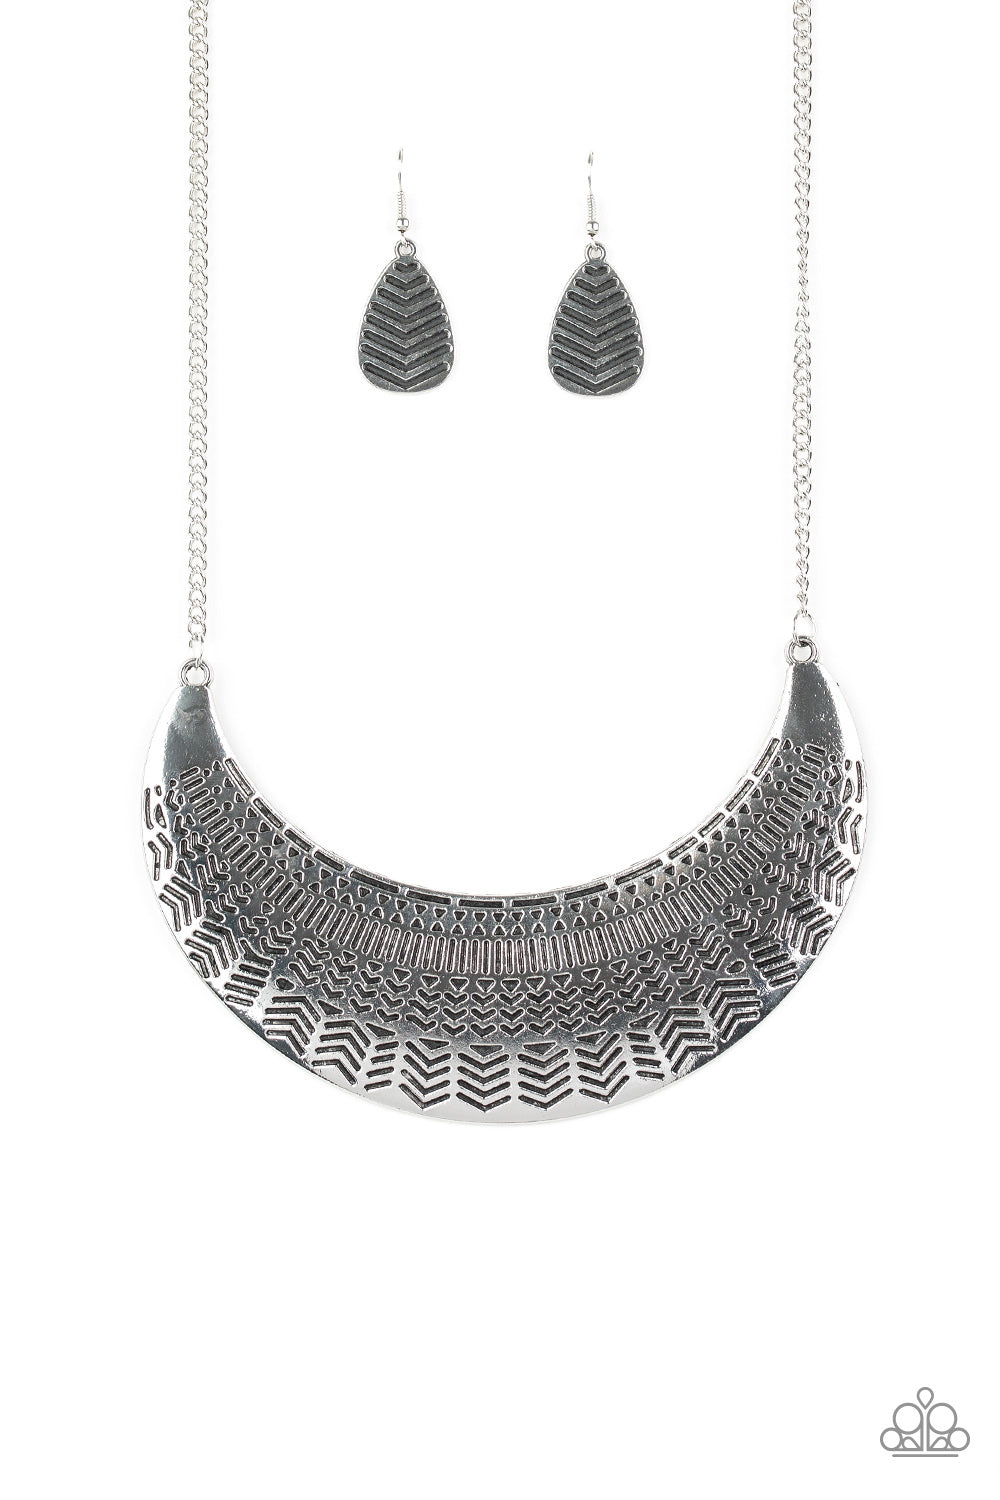 Large As Life Silver
Necklace Paparazzi